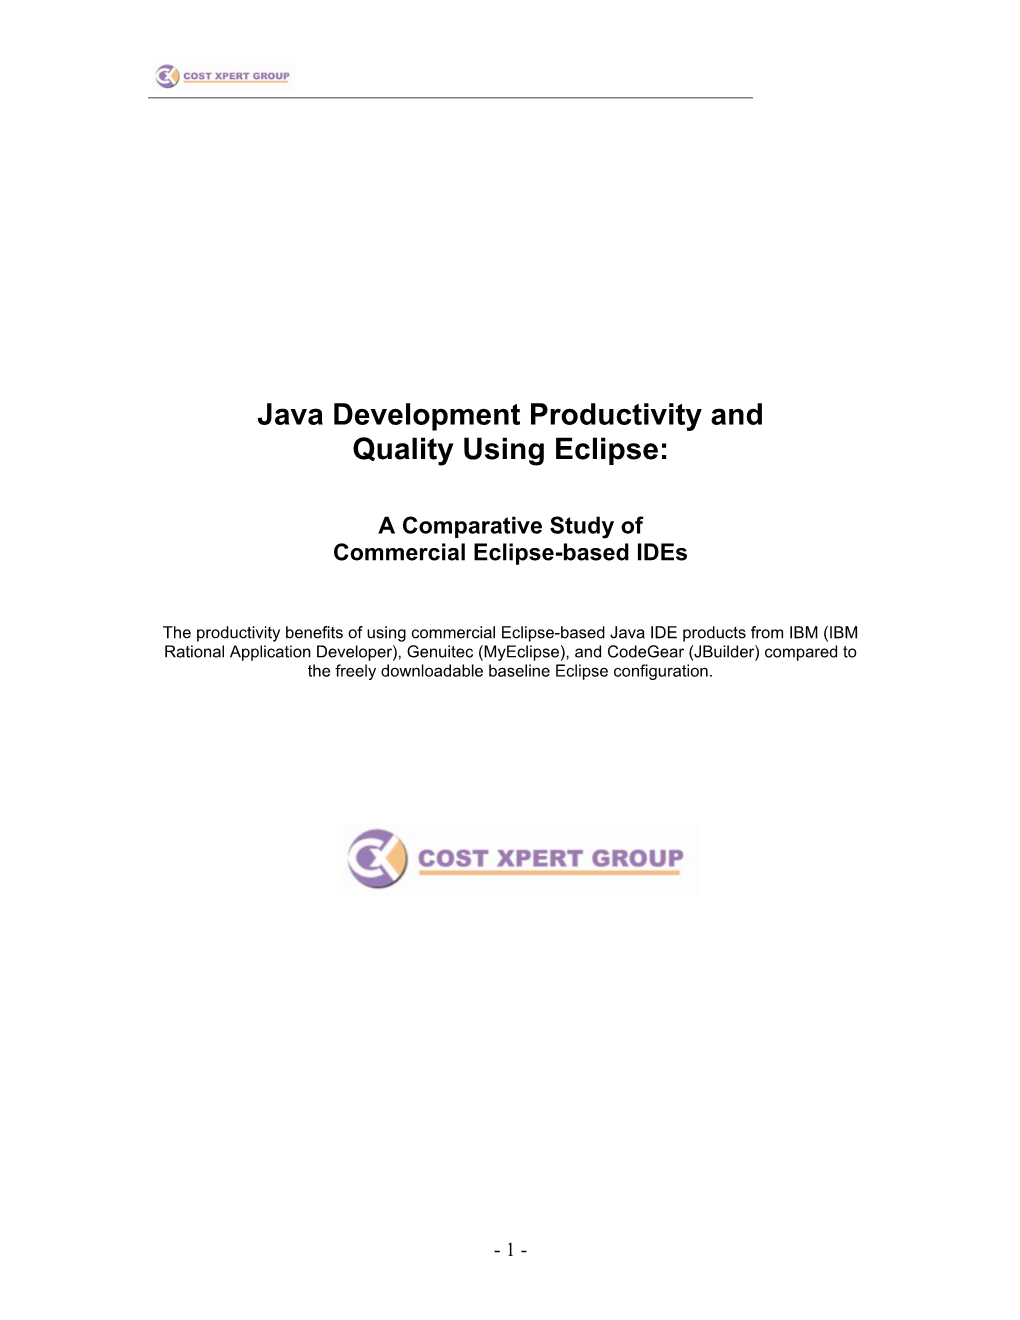 Java Development Productivity and Quality Using Eclipse